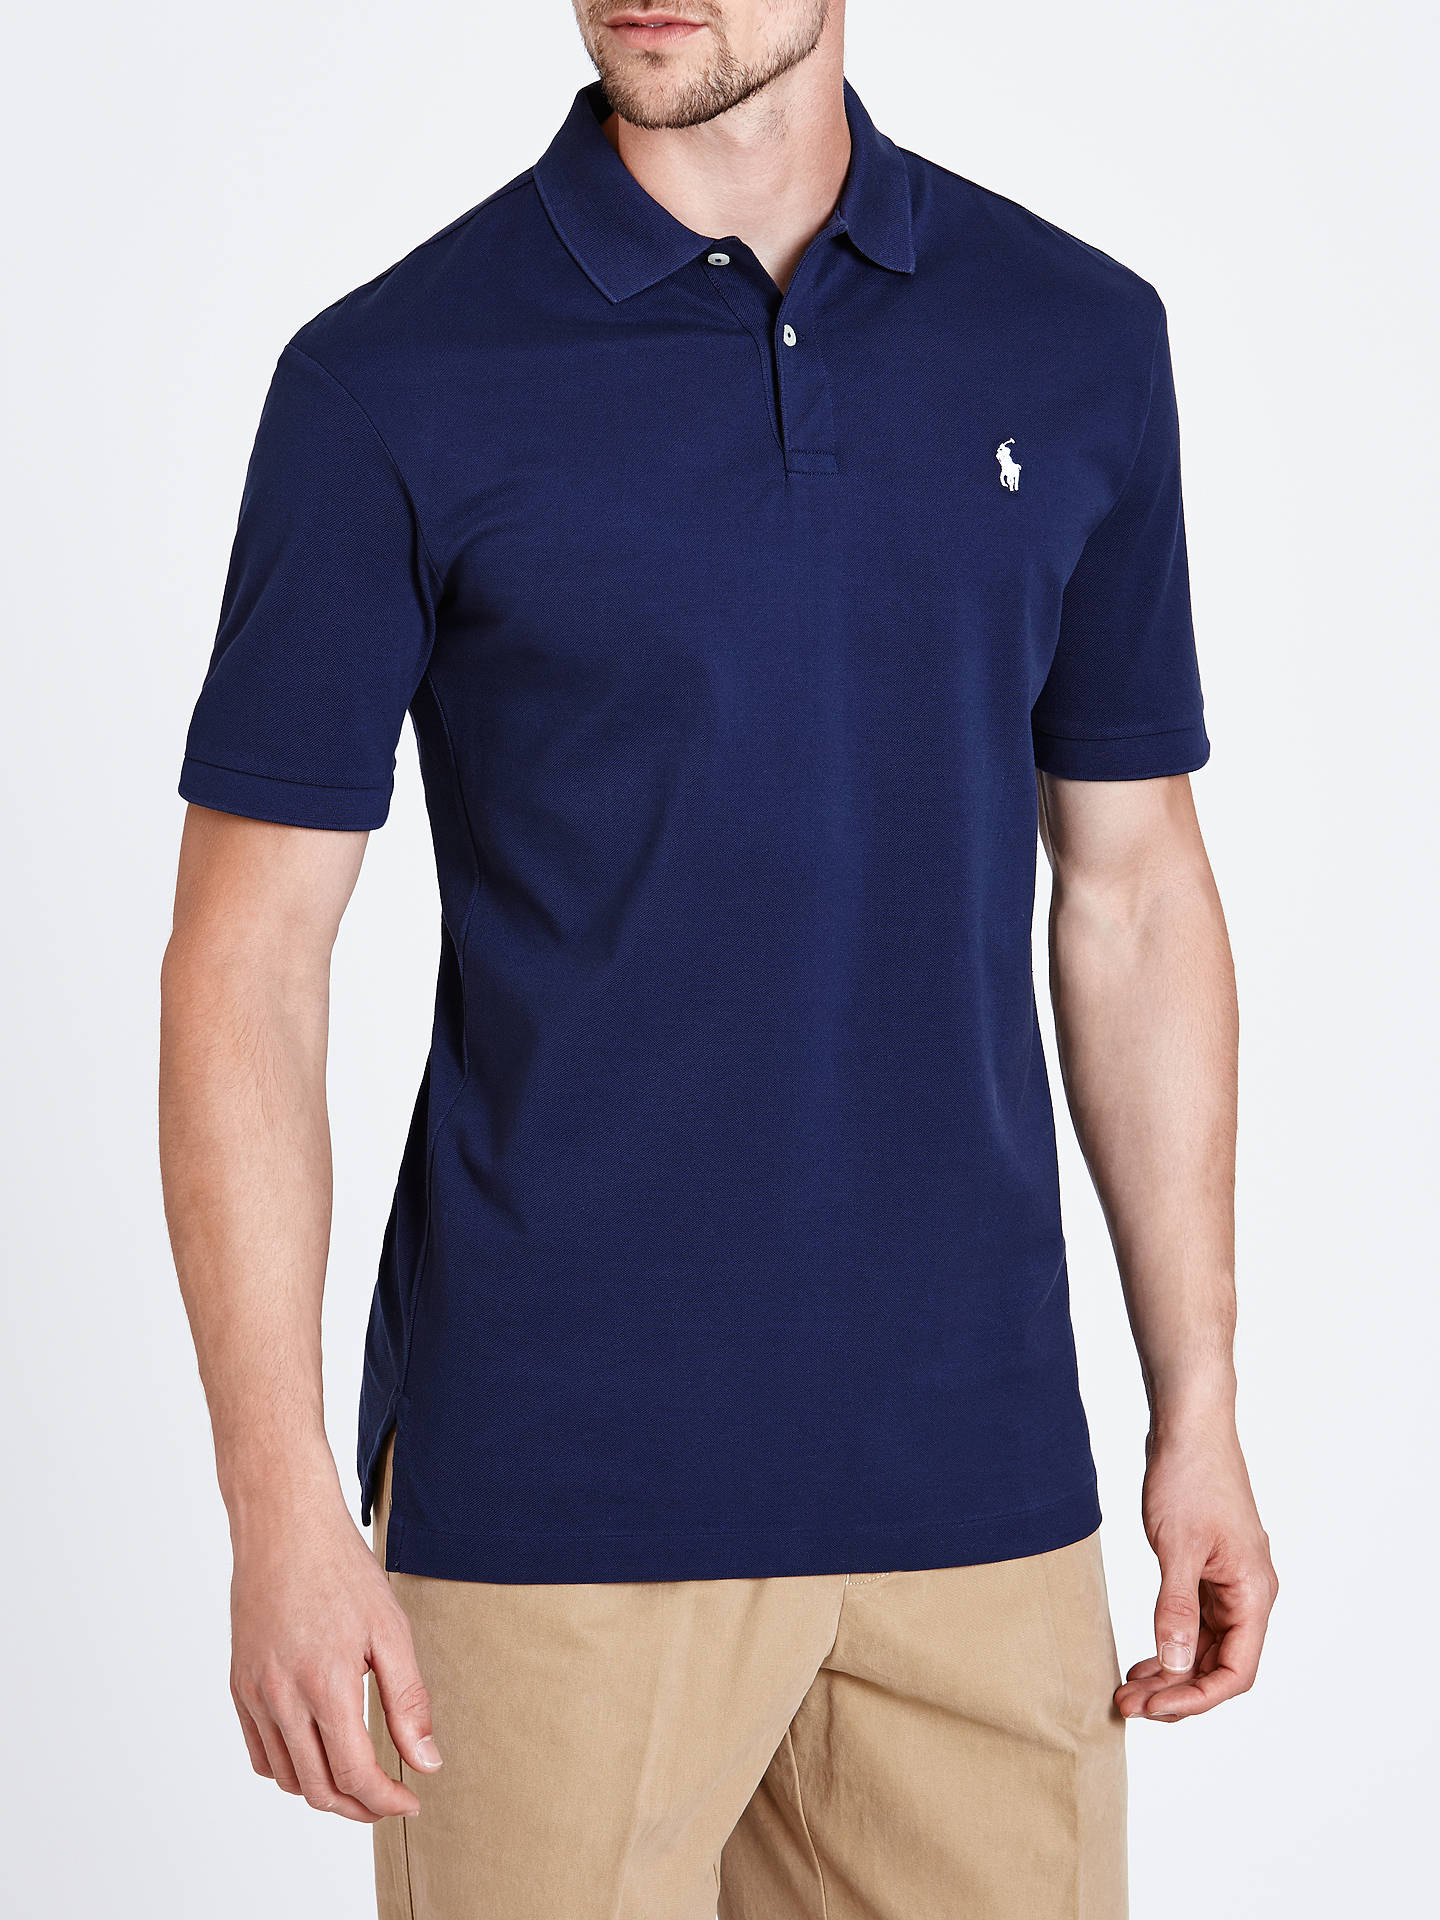 Polo Golf by Ralph Lauren Pro-Fit Polo Shirt at John Lewis & Partners